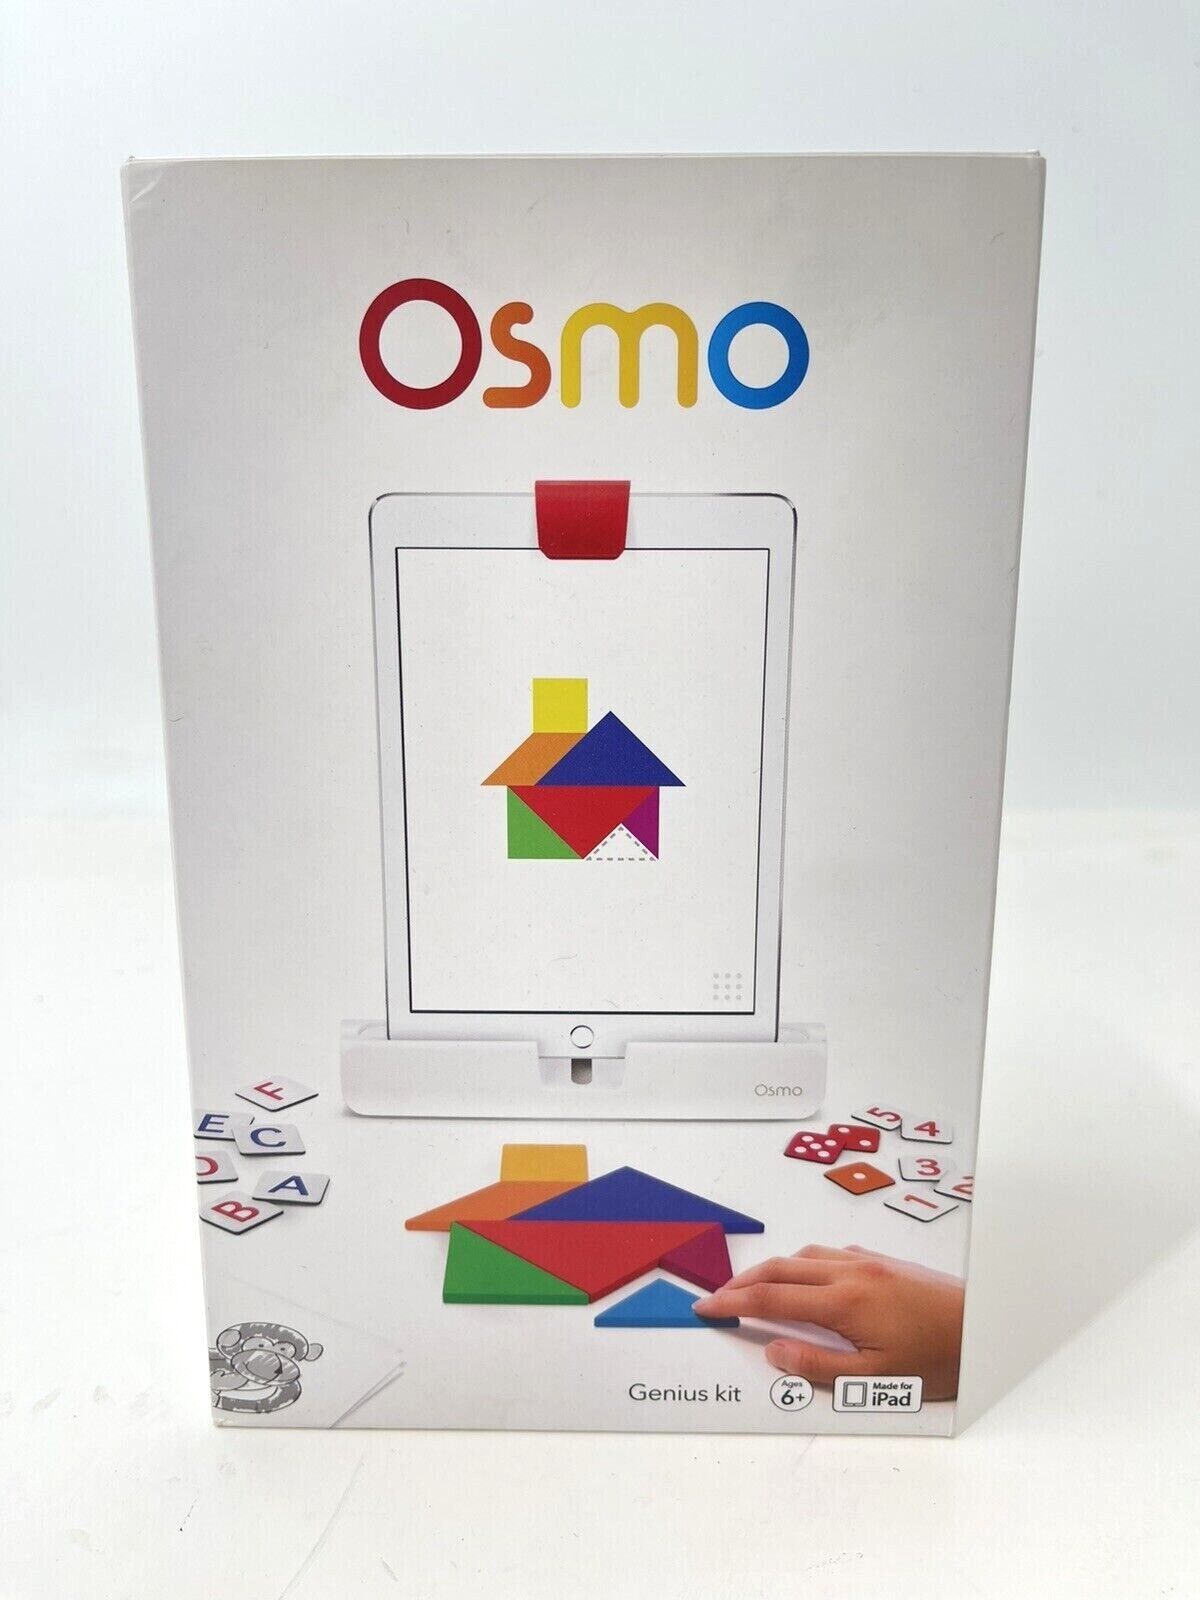 Osmo Genius Kit Learning System for Tablet, 2016 Discontinued Version Unsused